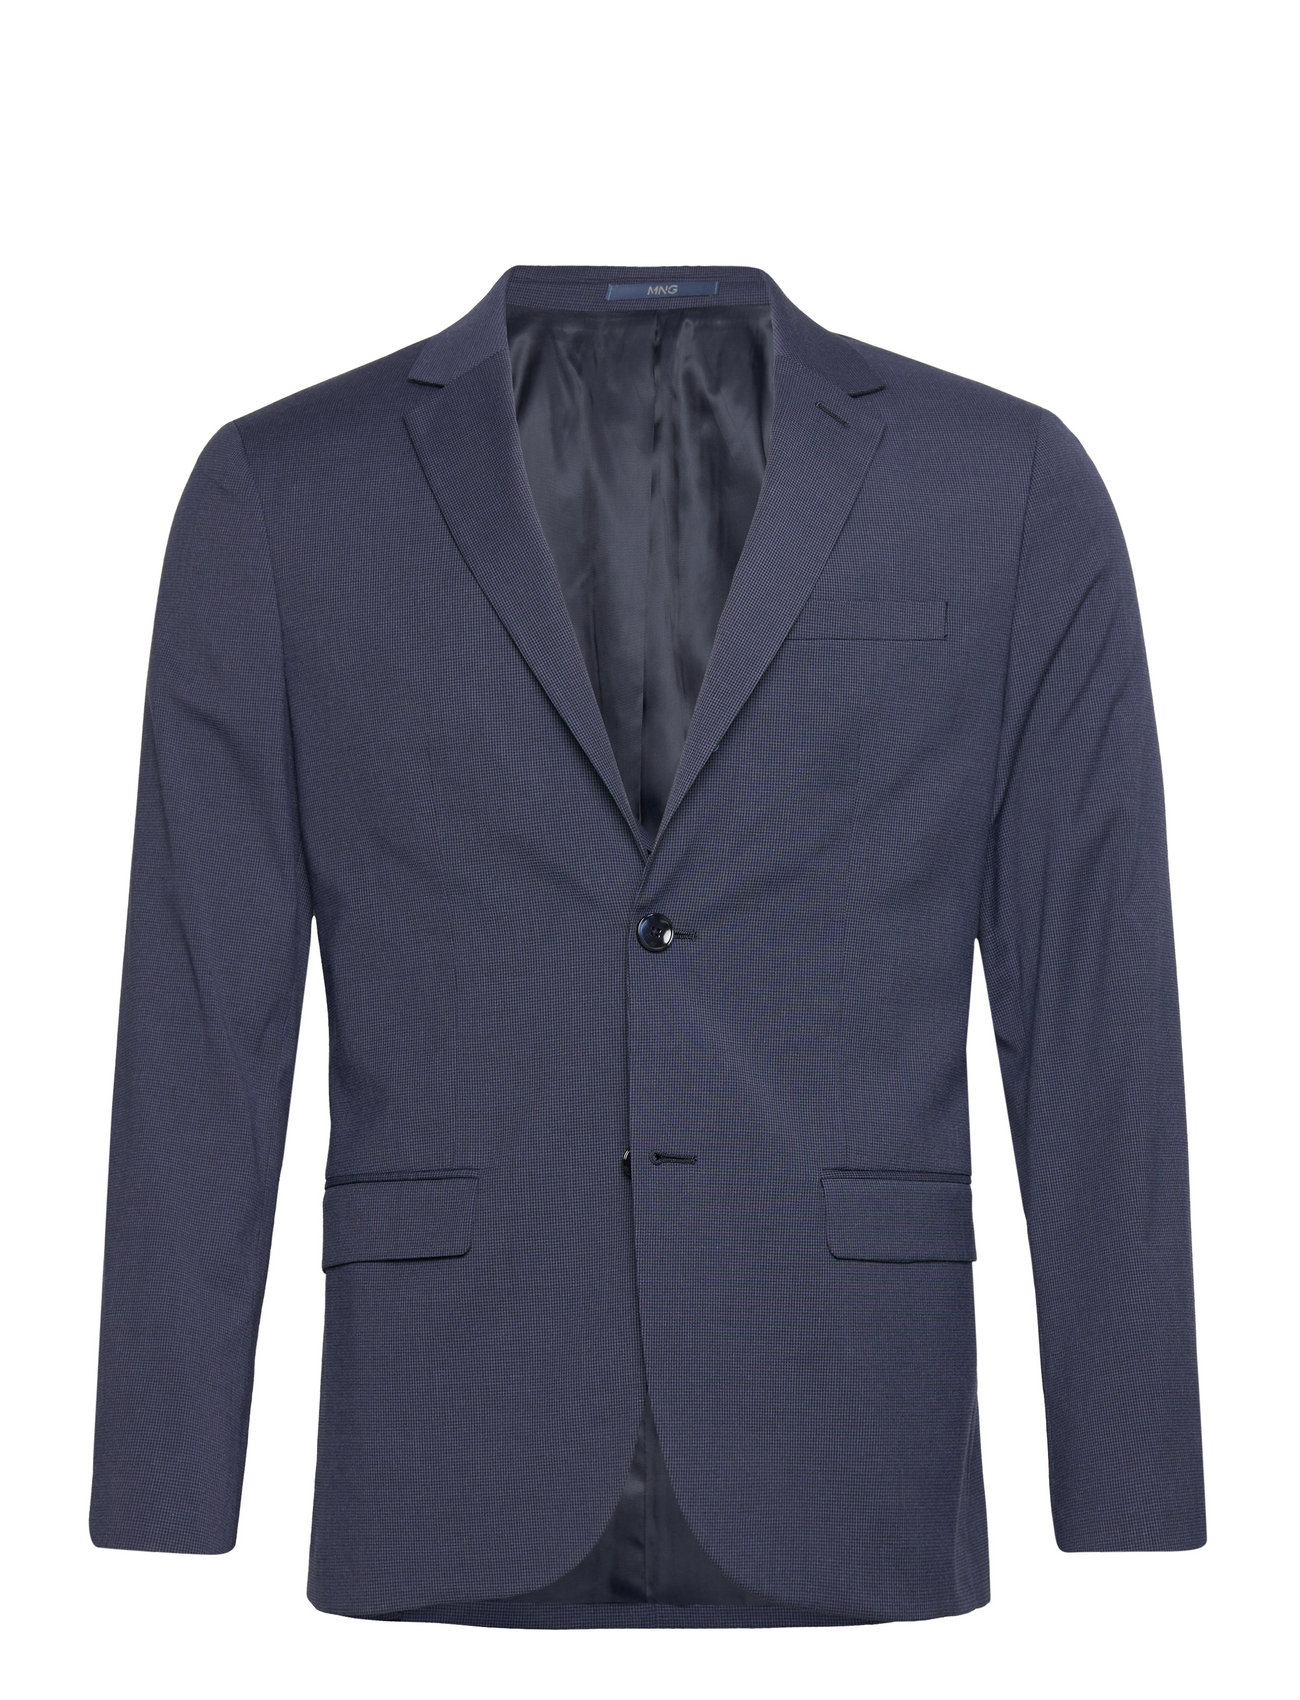 Super Slim-Fit Suit Jacket In Stretch Fabric Suits & Blazers Blazers Single Breasted Blazers Navy Mango